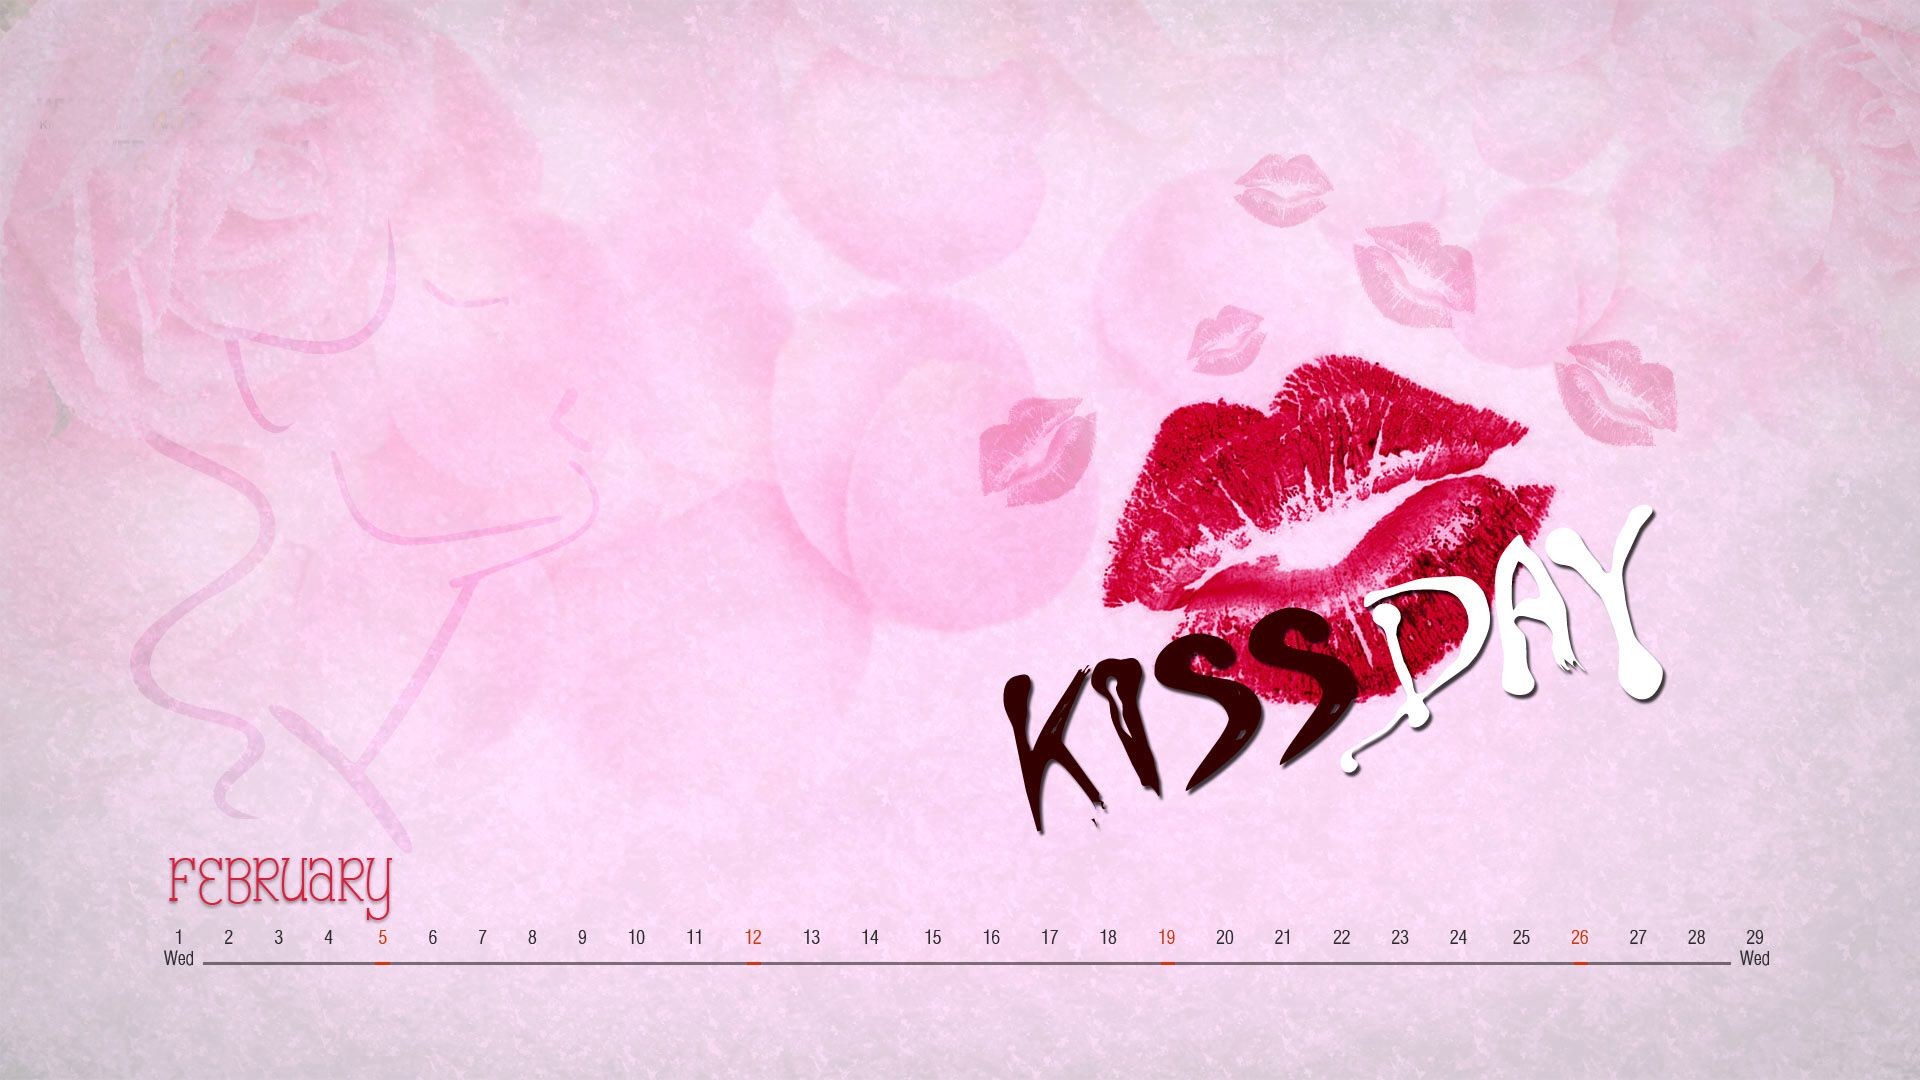 Download Kiss Wallpaper, Kiss Day E Greetings, Friendship Ecards, Happy Kiss Day